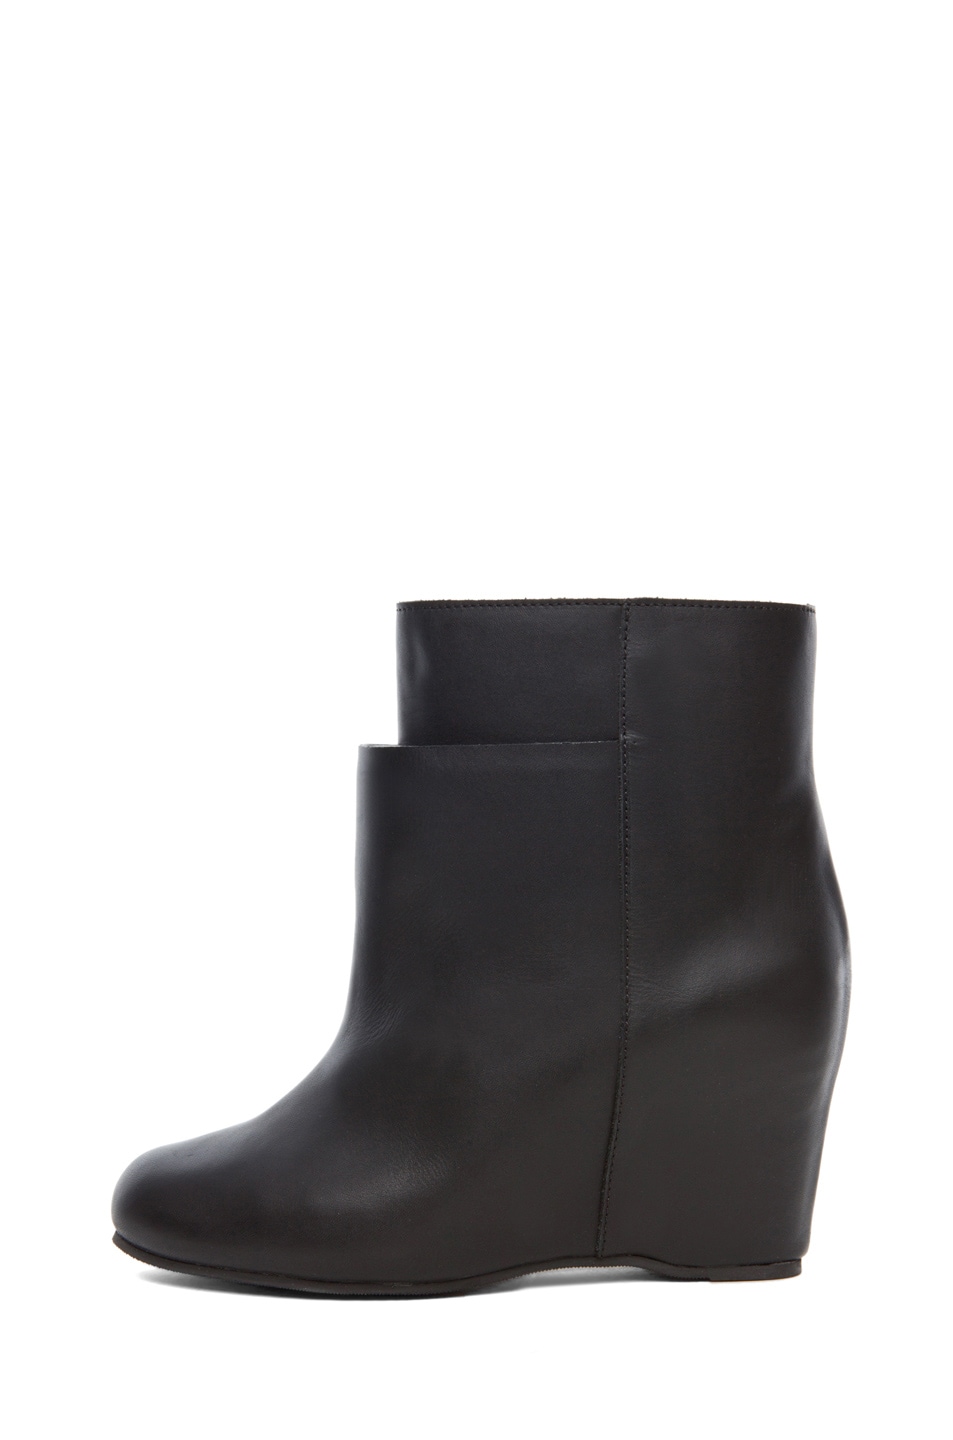 Image 1 of MM6 Maison Margiela Wedge Bootie in Black